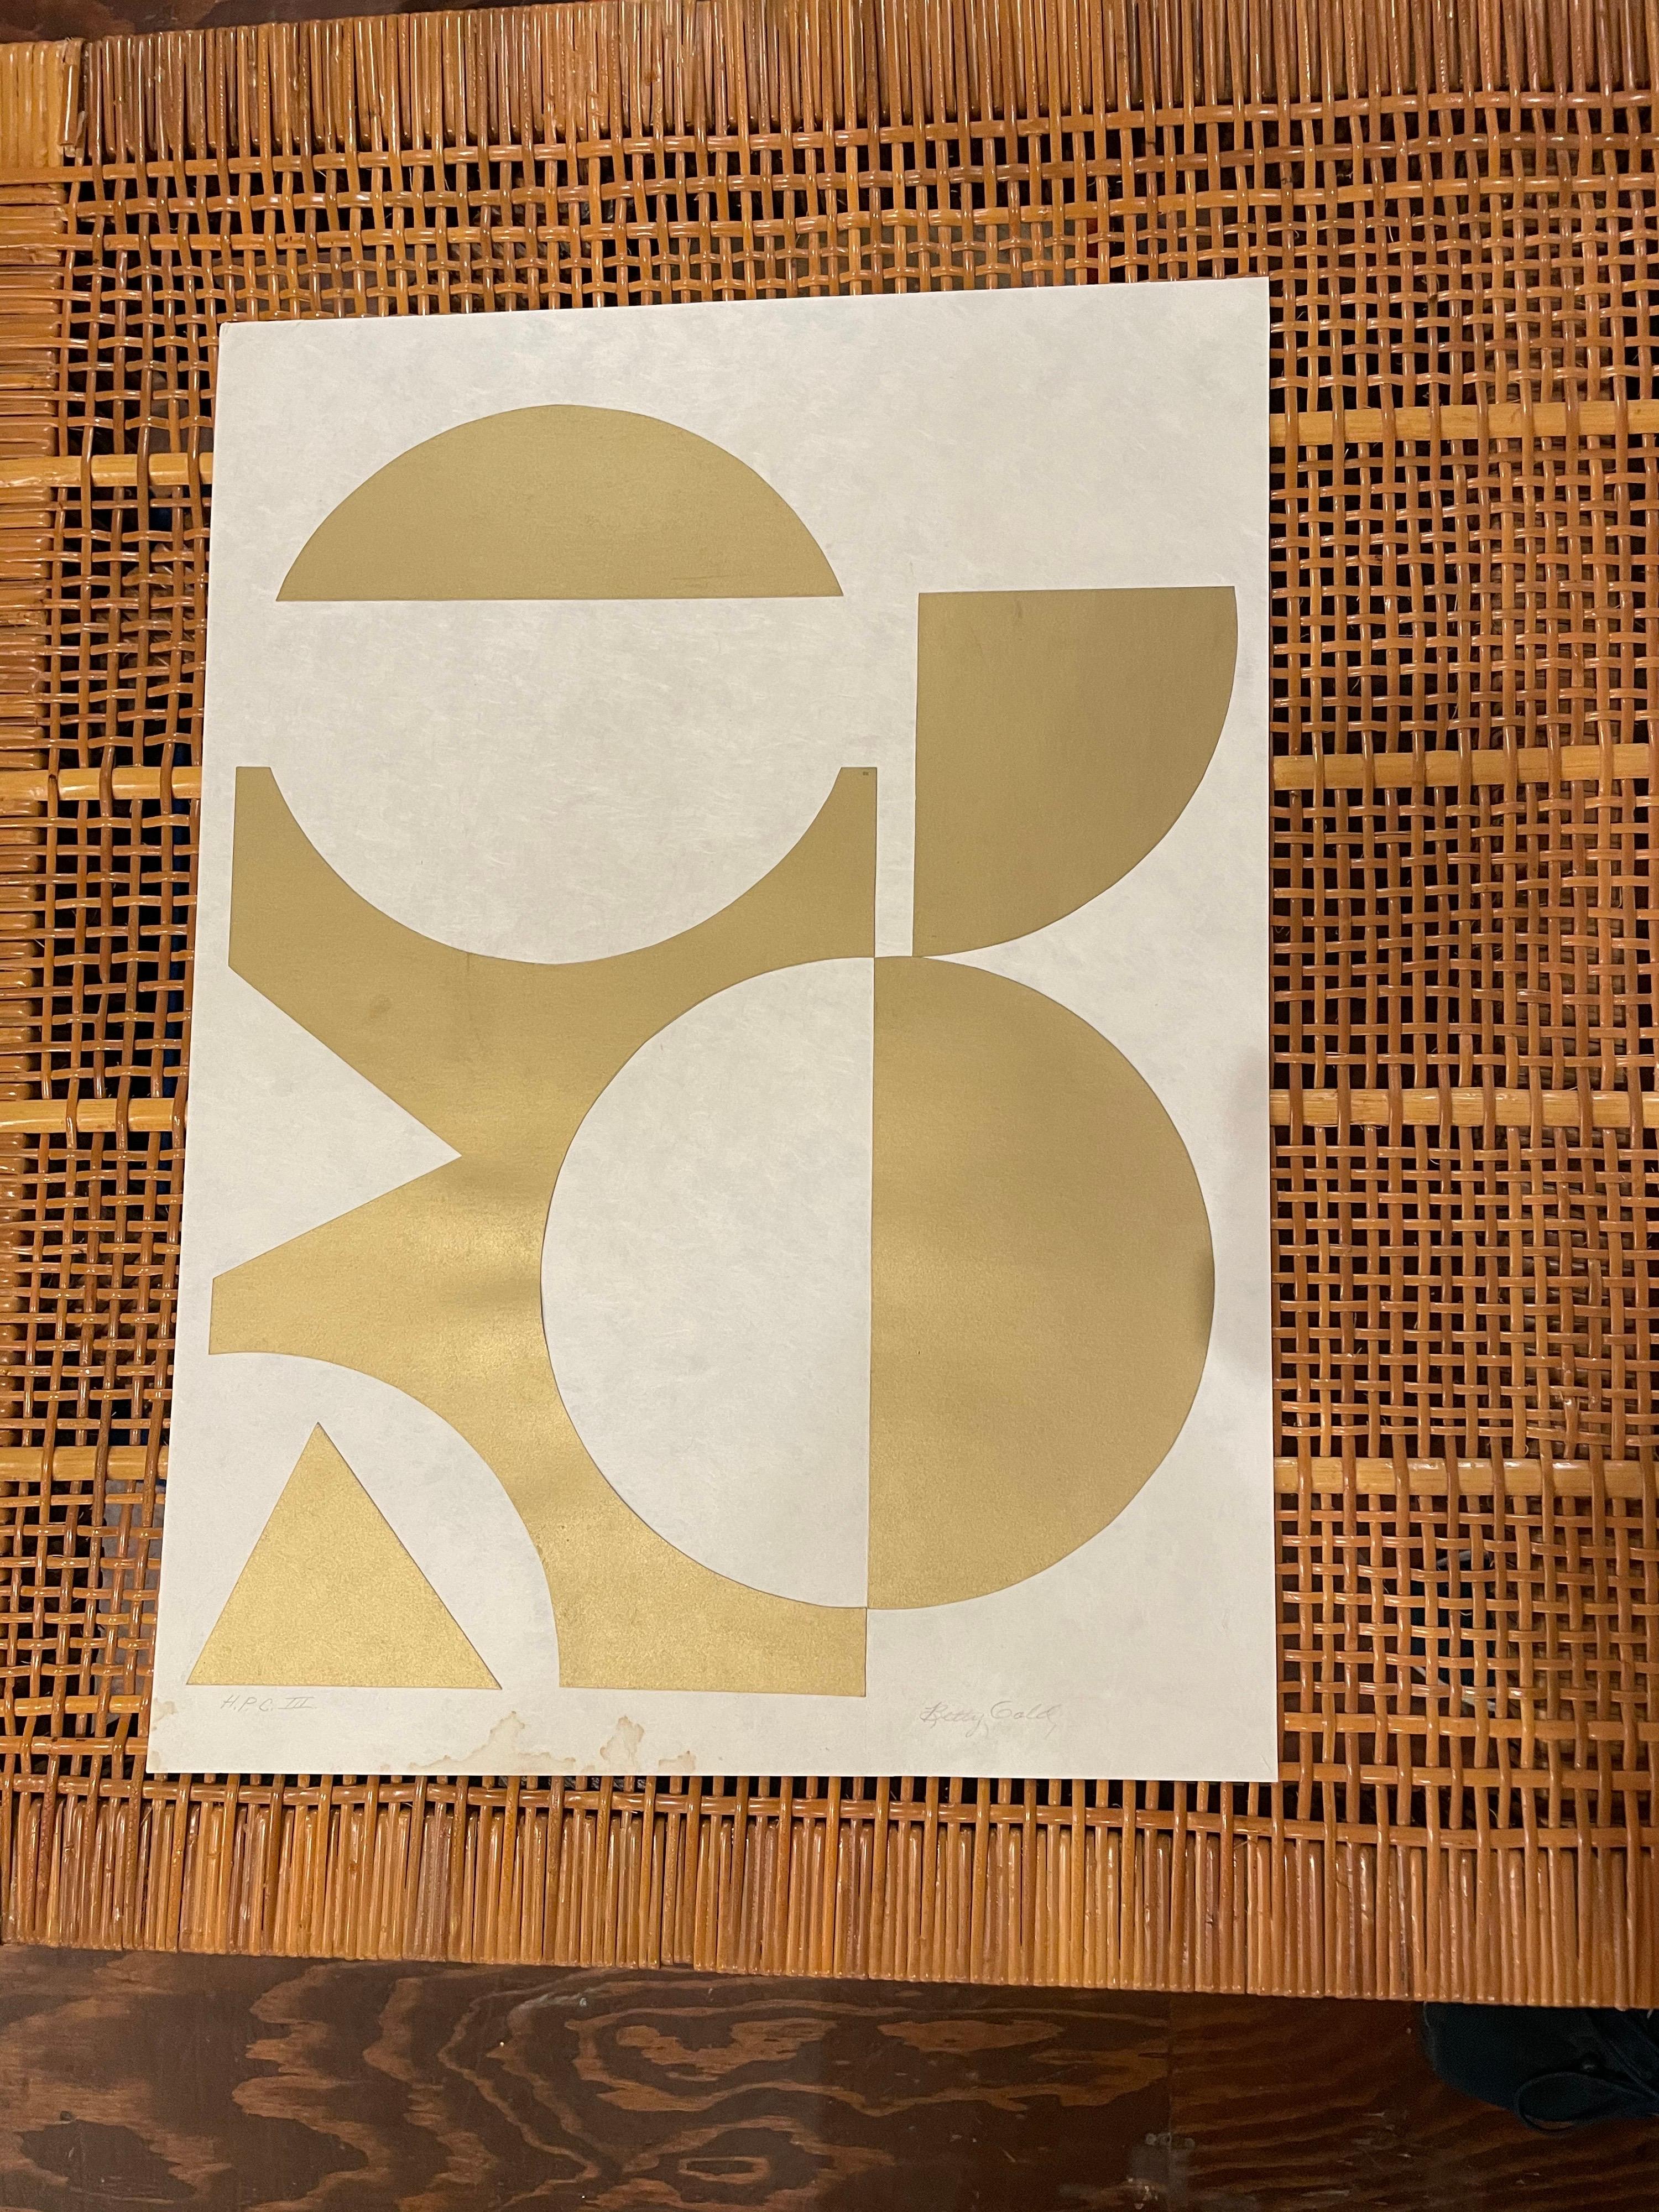 Rare signed mix media silkscreen some water damage on the bottom as shown this is an original piece by Betty Gold listed artist signed a gold cut geometric forms, rare to find the damage can be covered with the matting and frame.